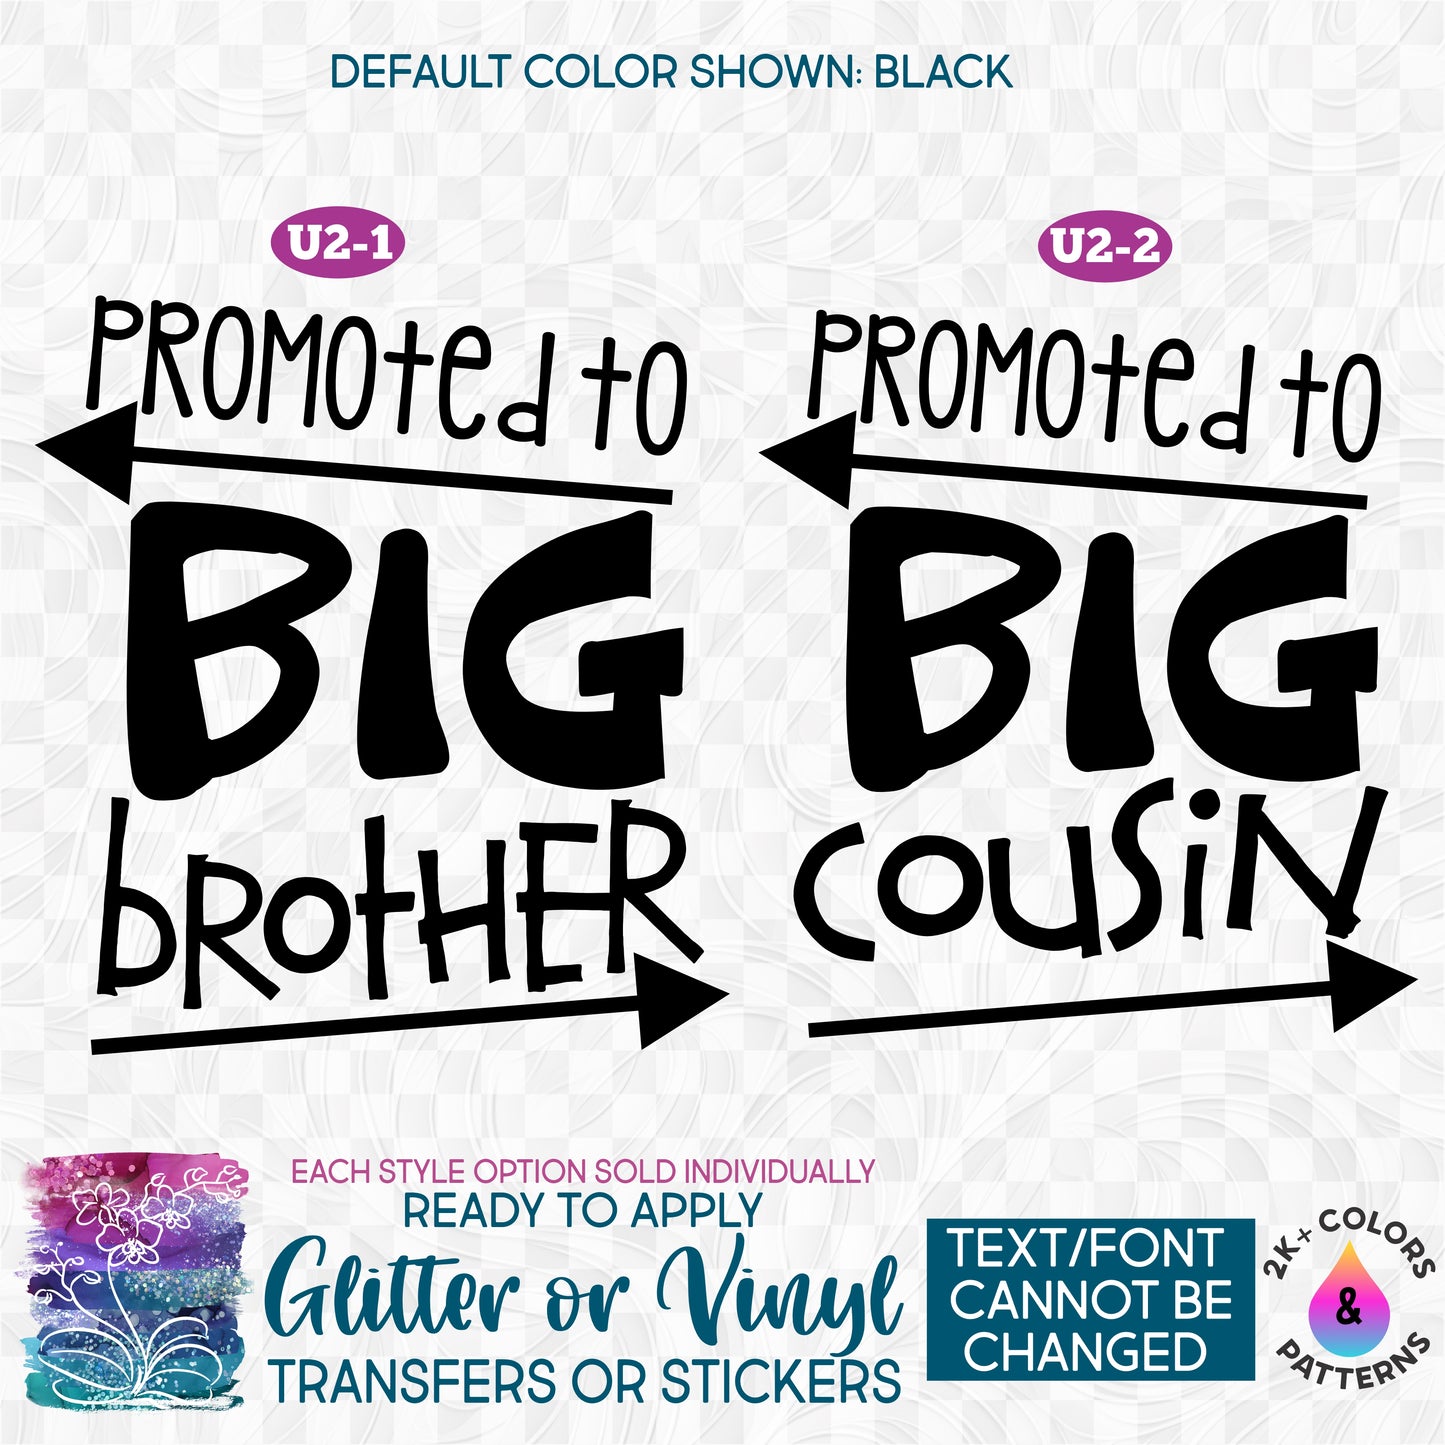 s122-U Promoted to Big Brother Cousin Made-to-Order Iron-On Transfer or Sticker